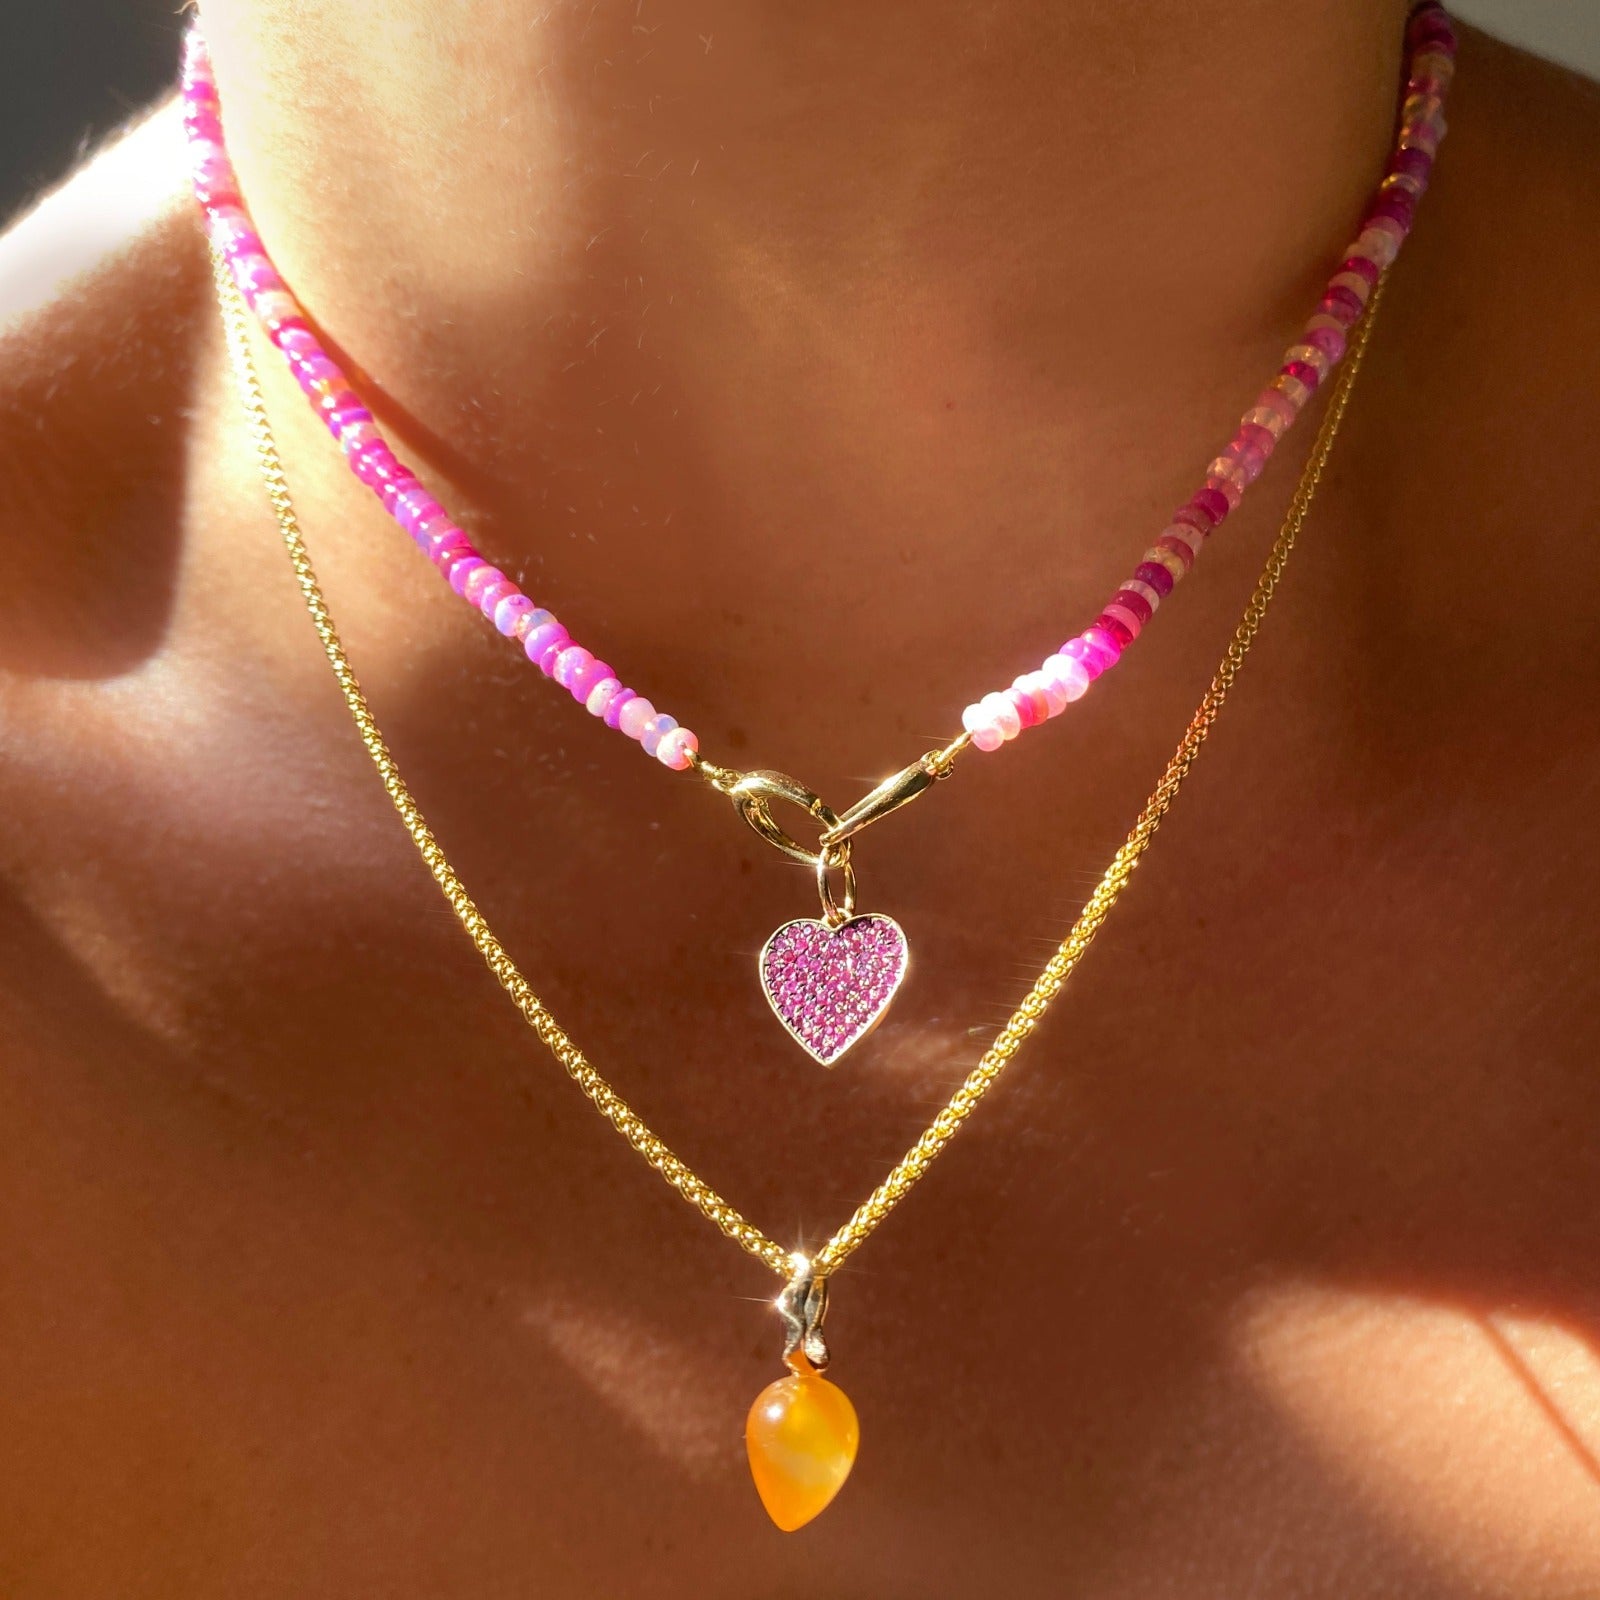 14k yellow gold medium pink stone pave blackened heart charm. Styled on a neck hanging from oval clasps of a beaded necklace. 